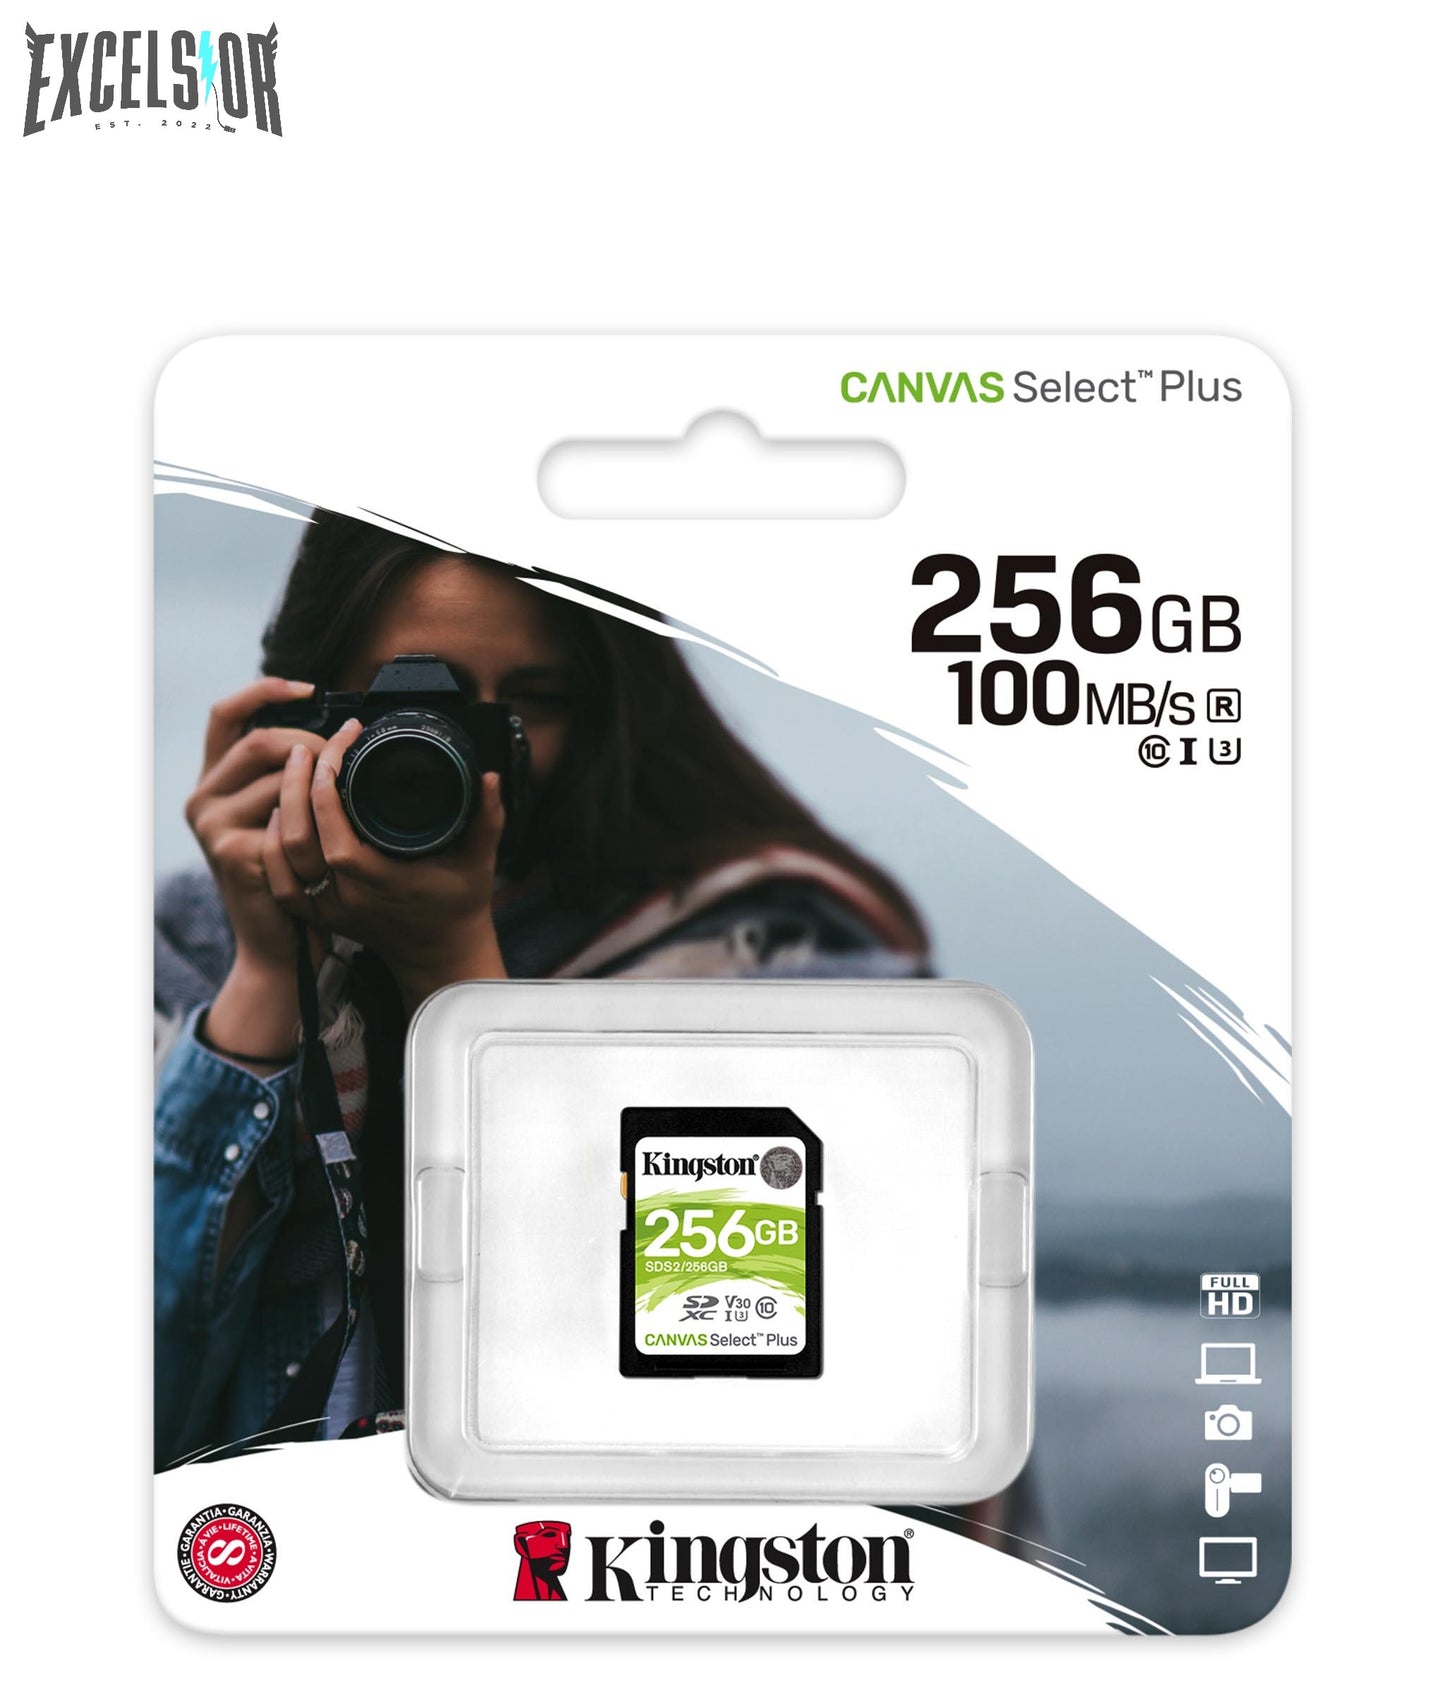 Kingston SDS Select Plus (for HD 1080p and 4K Video Cameras)